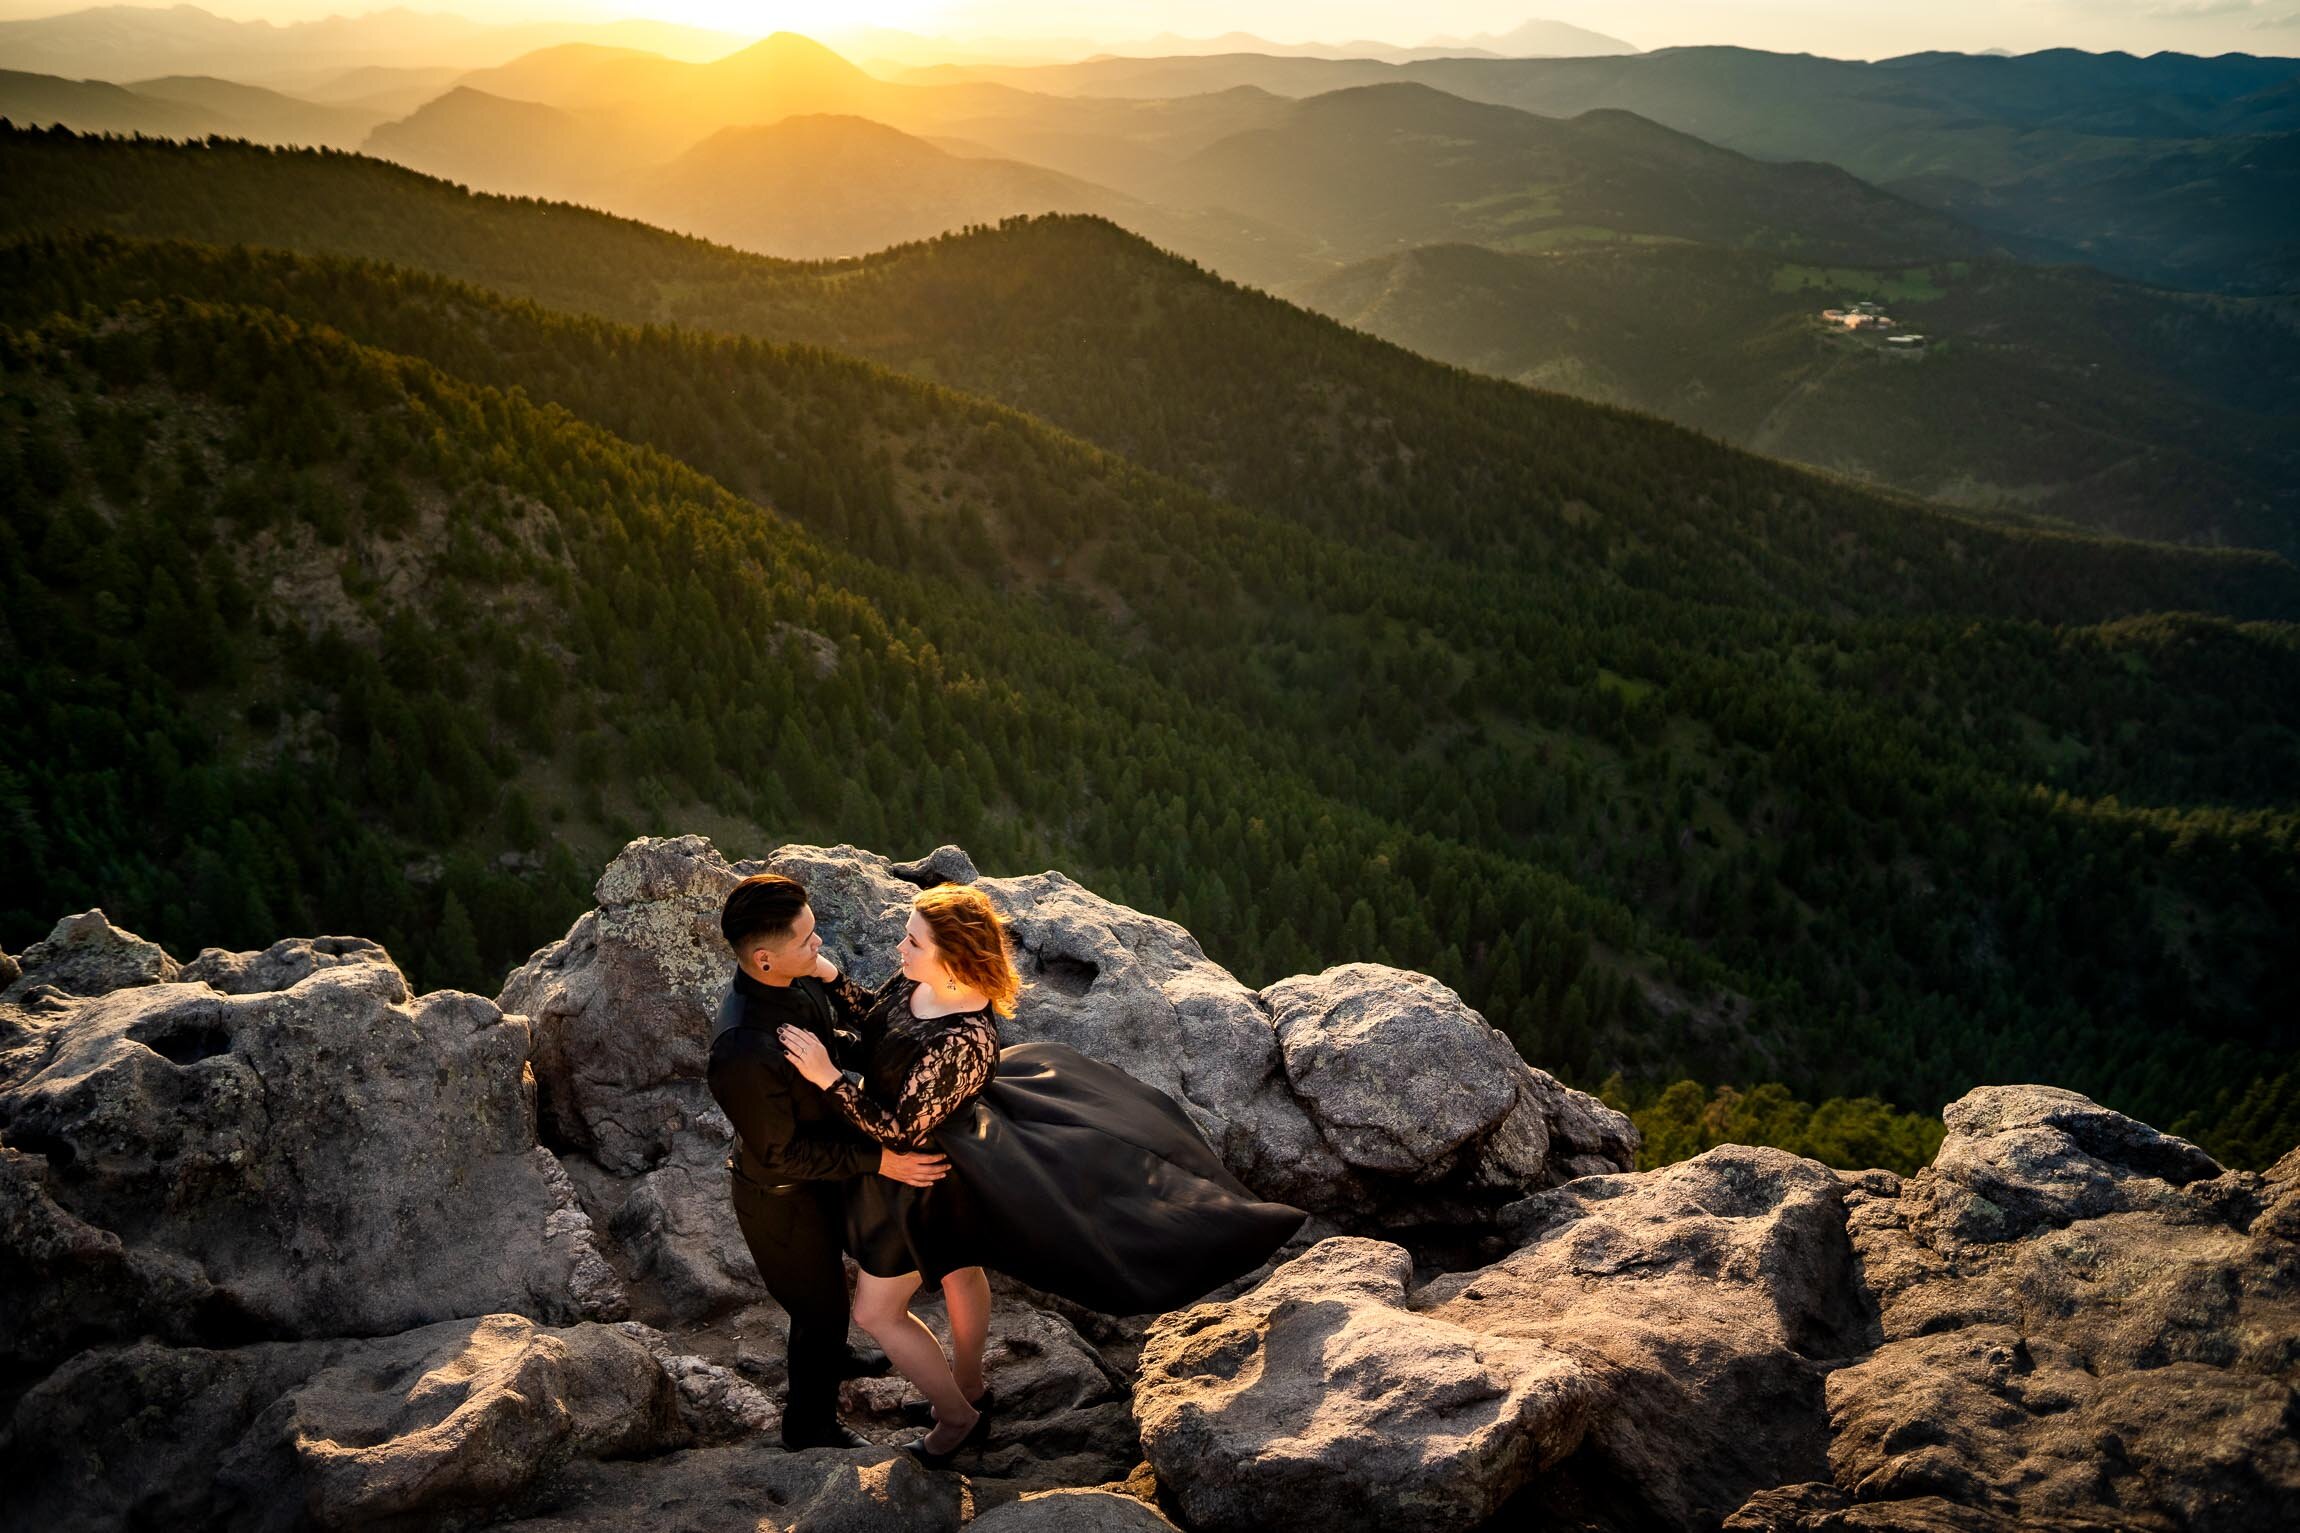 Engaged couple kisses for a portrait on a rocky ledge overlooking the mountains during sunset, Engagement Session, Sunset Engagement photos, Engagement Photos, Engagement Photos Inspiration, Engagement Photography, Engagement Photographer, Summer Engagement Photos, Mountain Engagement Photos, Lost Gulch Overlook engagement session, Lost Gulch Overlook engagement photos, Lost Gulch Overlook engagement photography, Lost Gulch Overlook engagement photographer, Lost Gulch Overlook  engagement inspiration, Boulder engagement session, Boulder engagement photos, Boulder engagement photography, Boulder engagement photographer, Boulder engagement inspiration, Colorado engagement session, Colorado engagement photos, Colorado engagement photography, Colorado engagement photographer, Colorado engagement inspiration